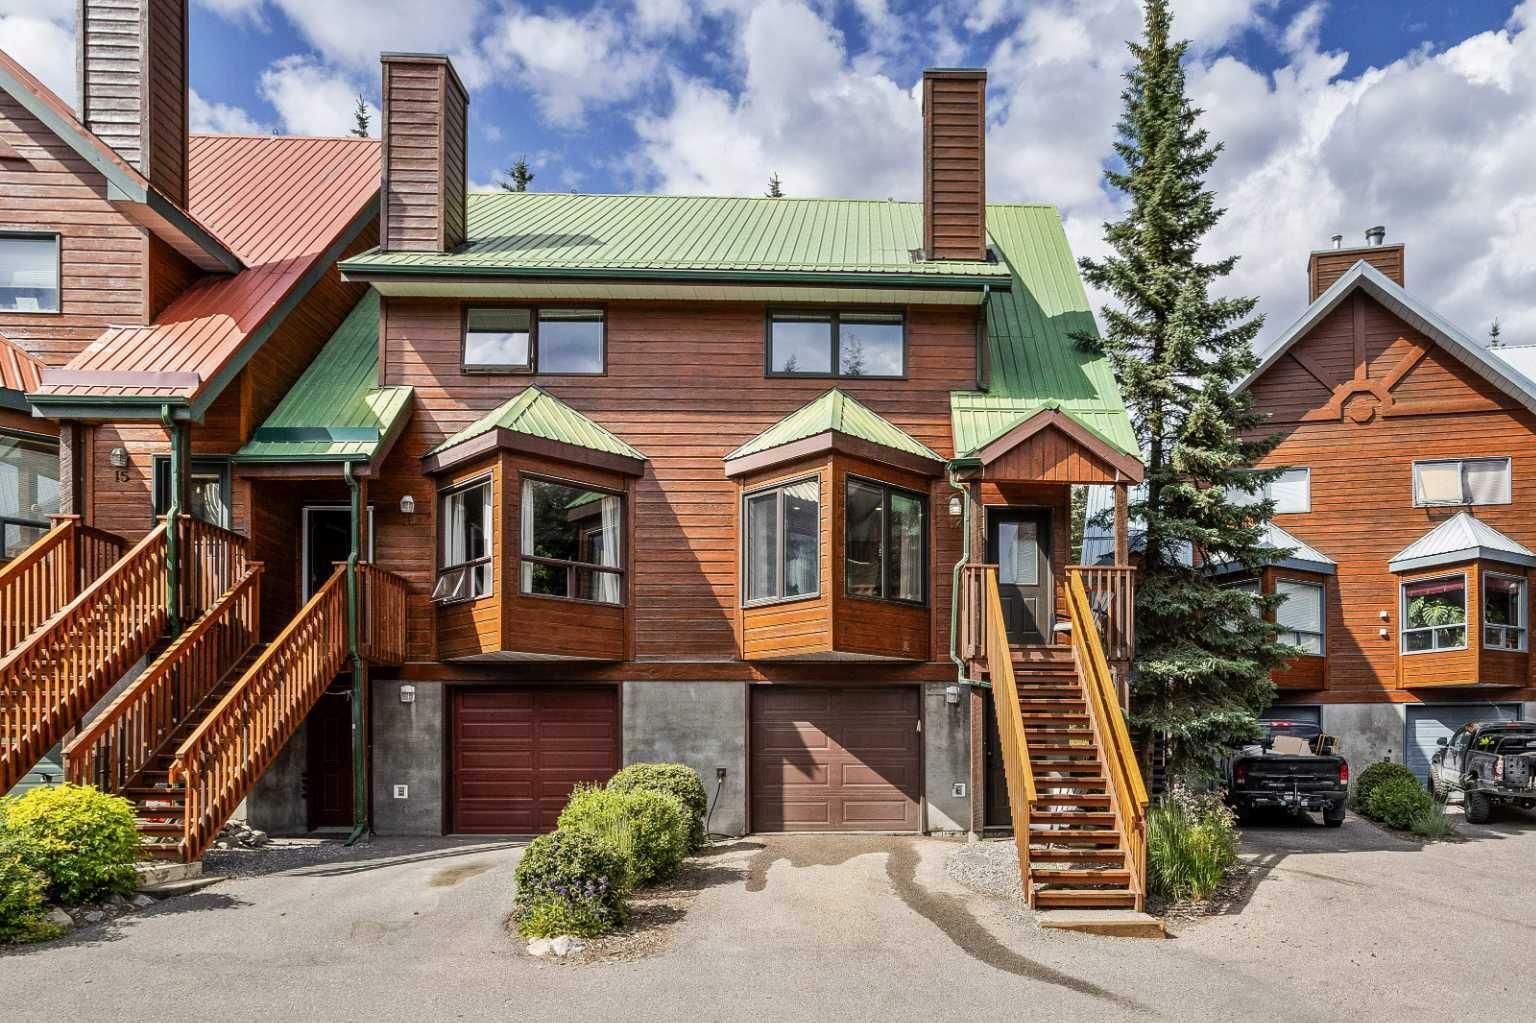 241 Benchlands Terrace 17  Canmore AB T1W 2Y2 photo